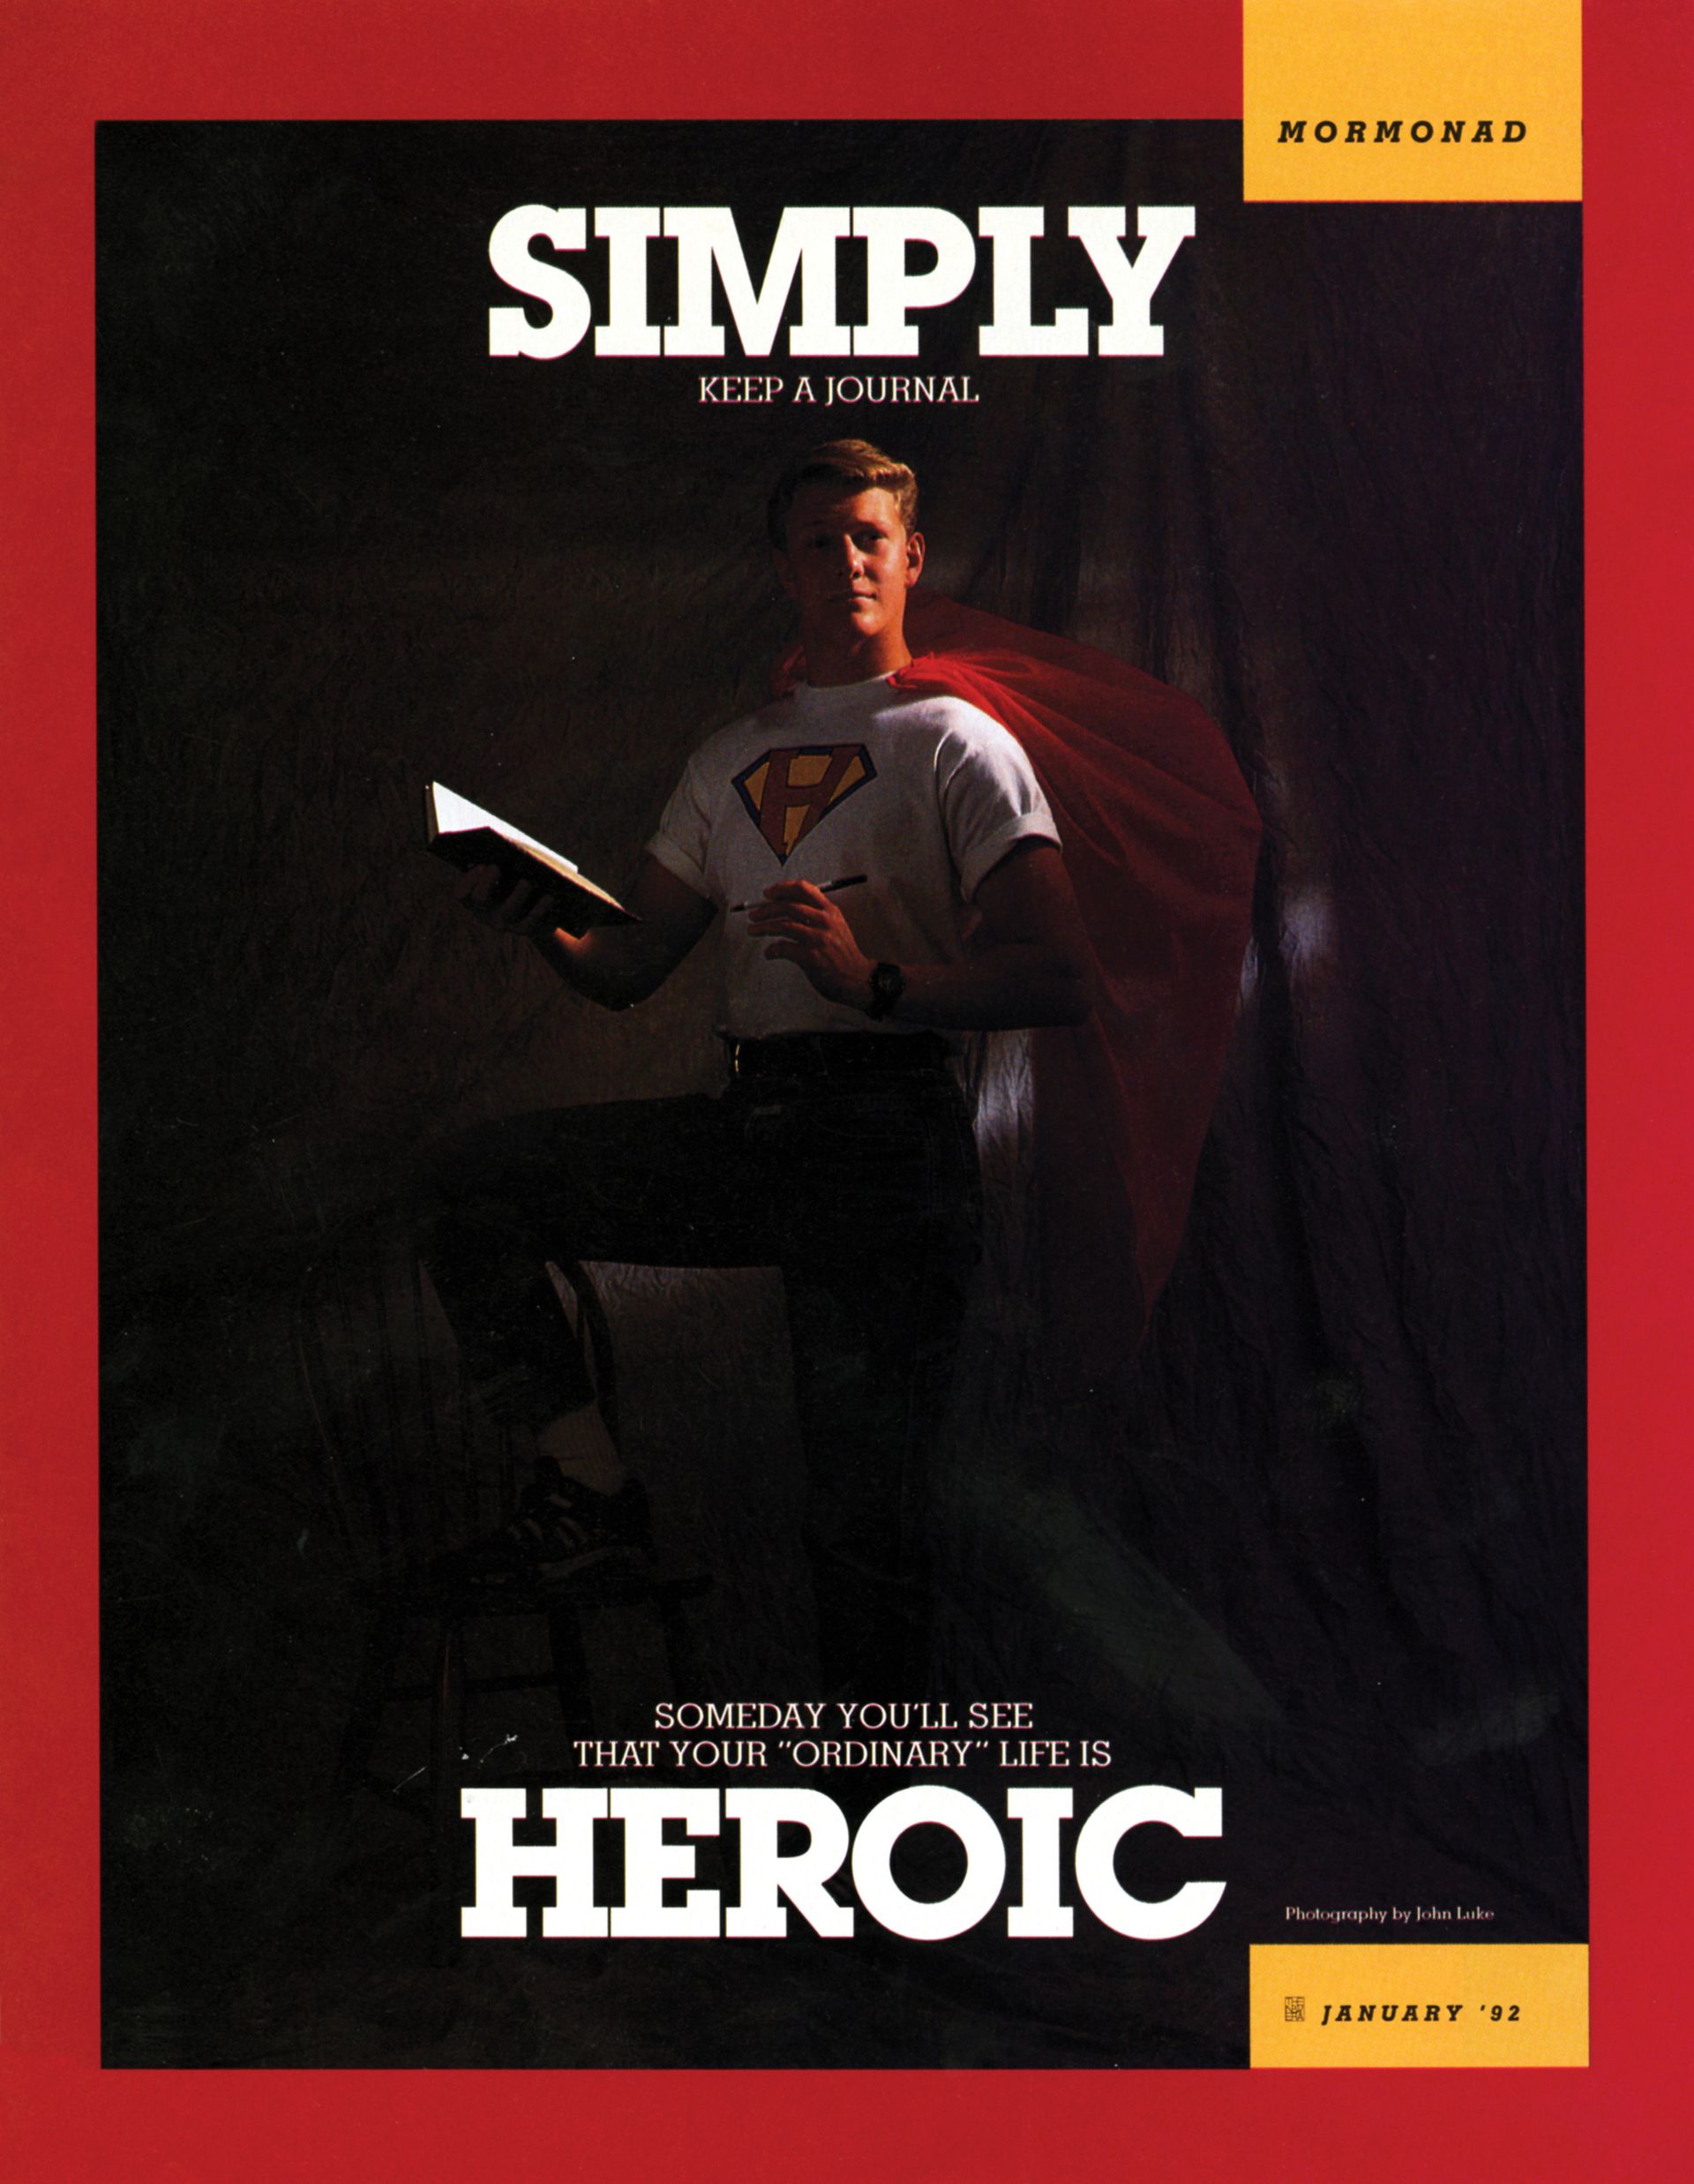 Simply keep a journal. Someday You'll see that your “ordinary” life is heroic. Jan. 1992 © undefined ipCode 1.